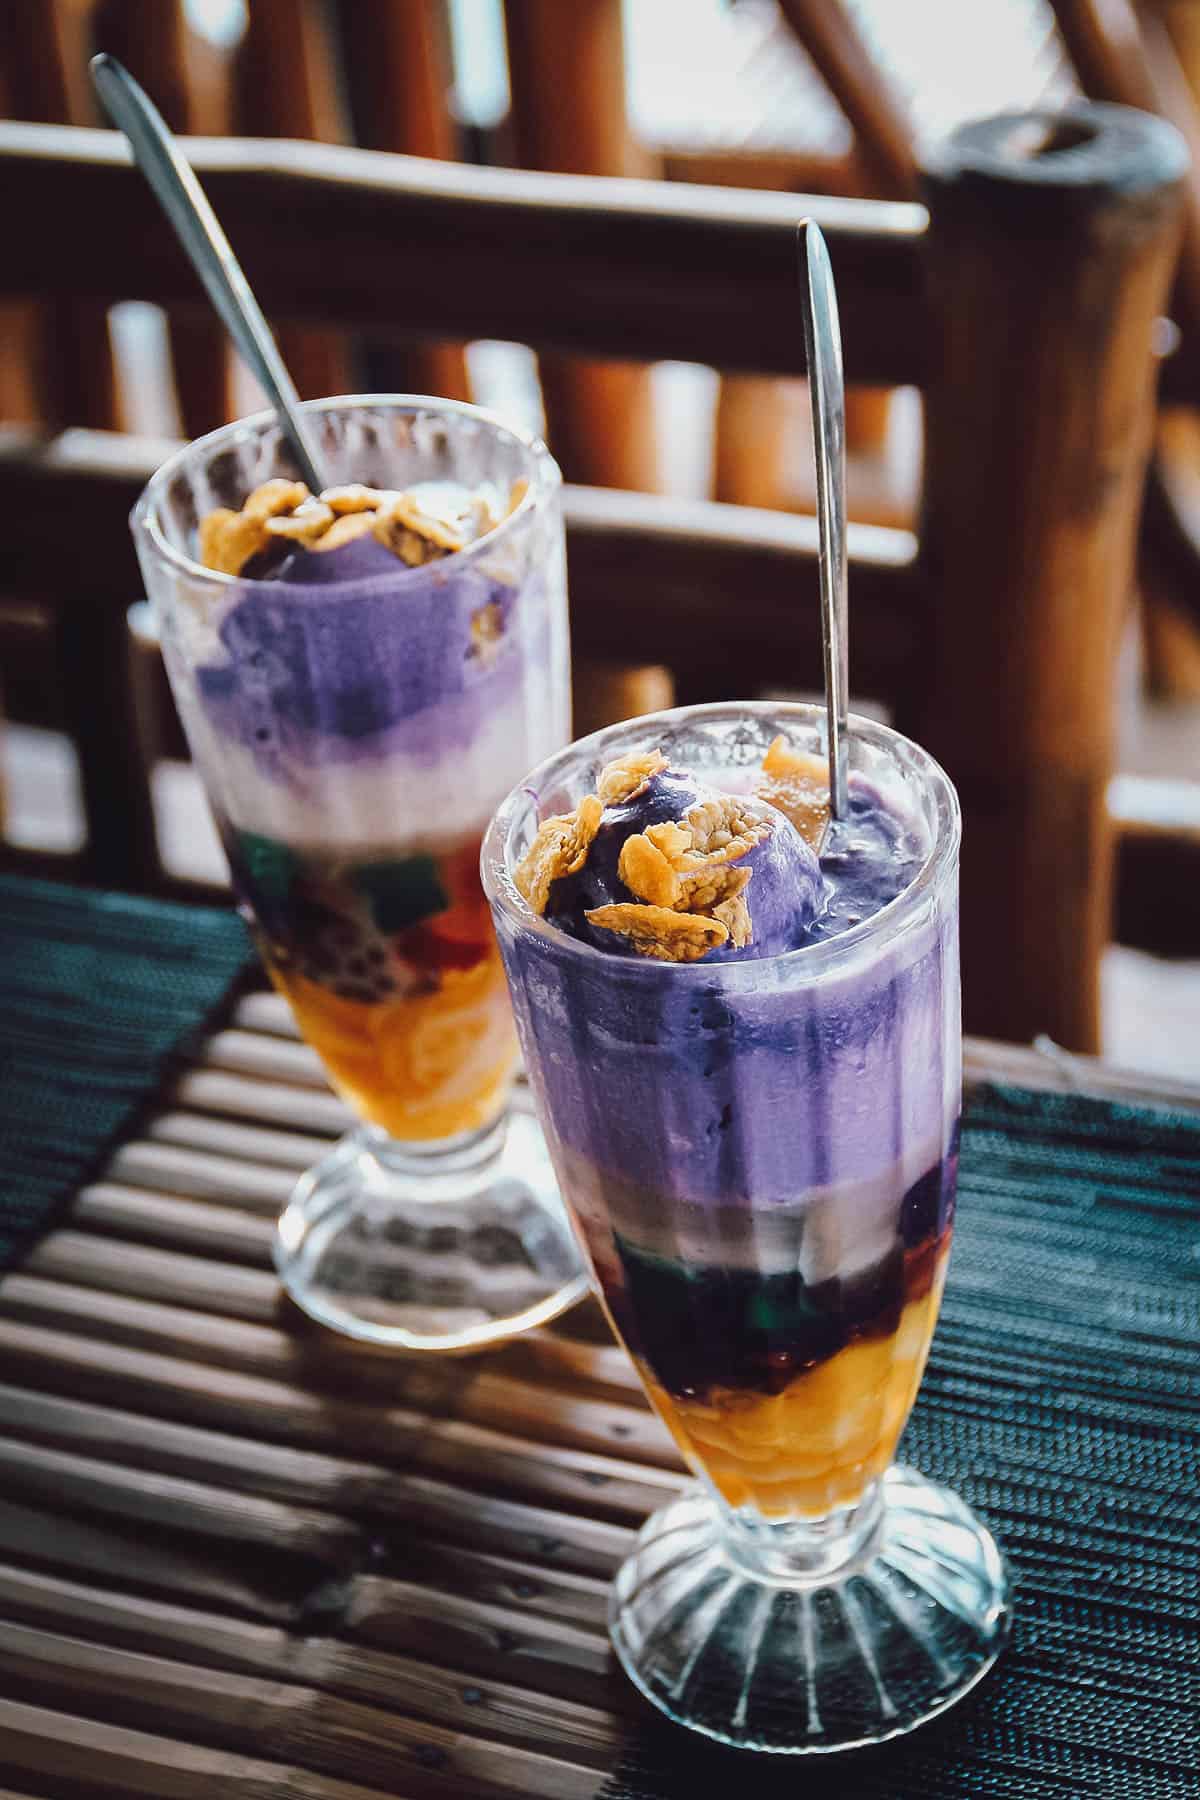 Halo-Halo, one of the most popular desserts in the Philippines